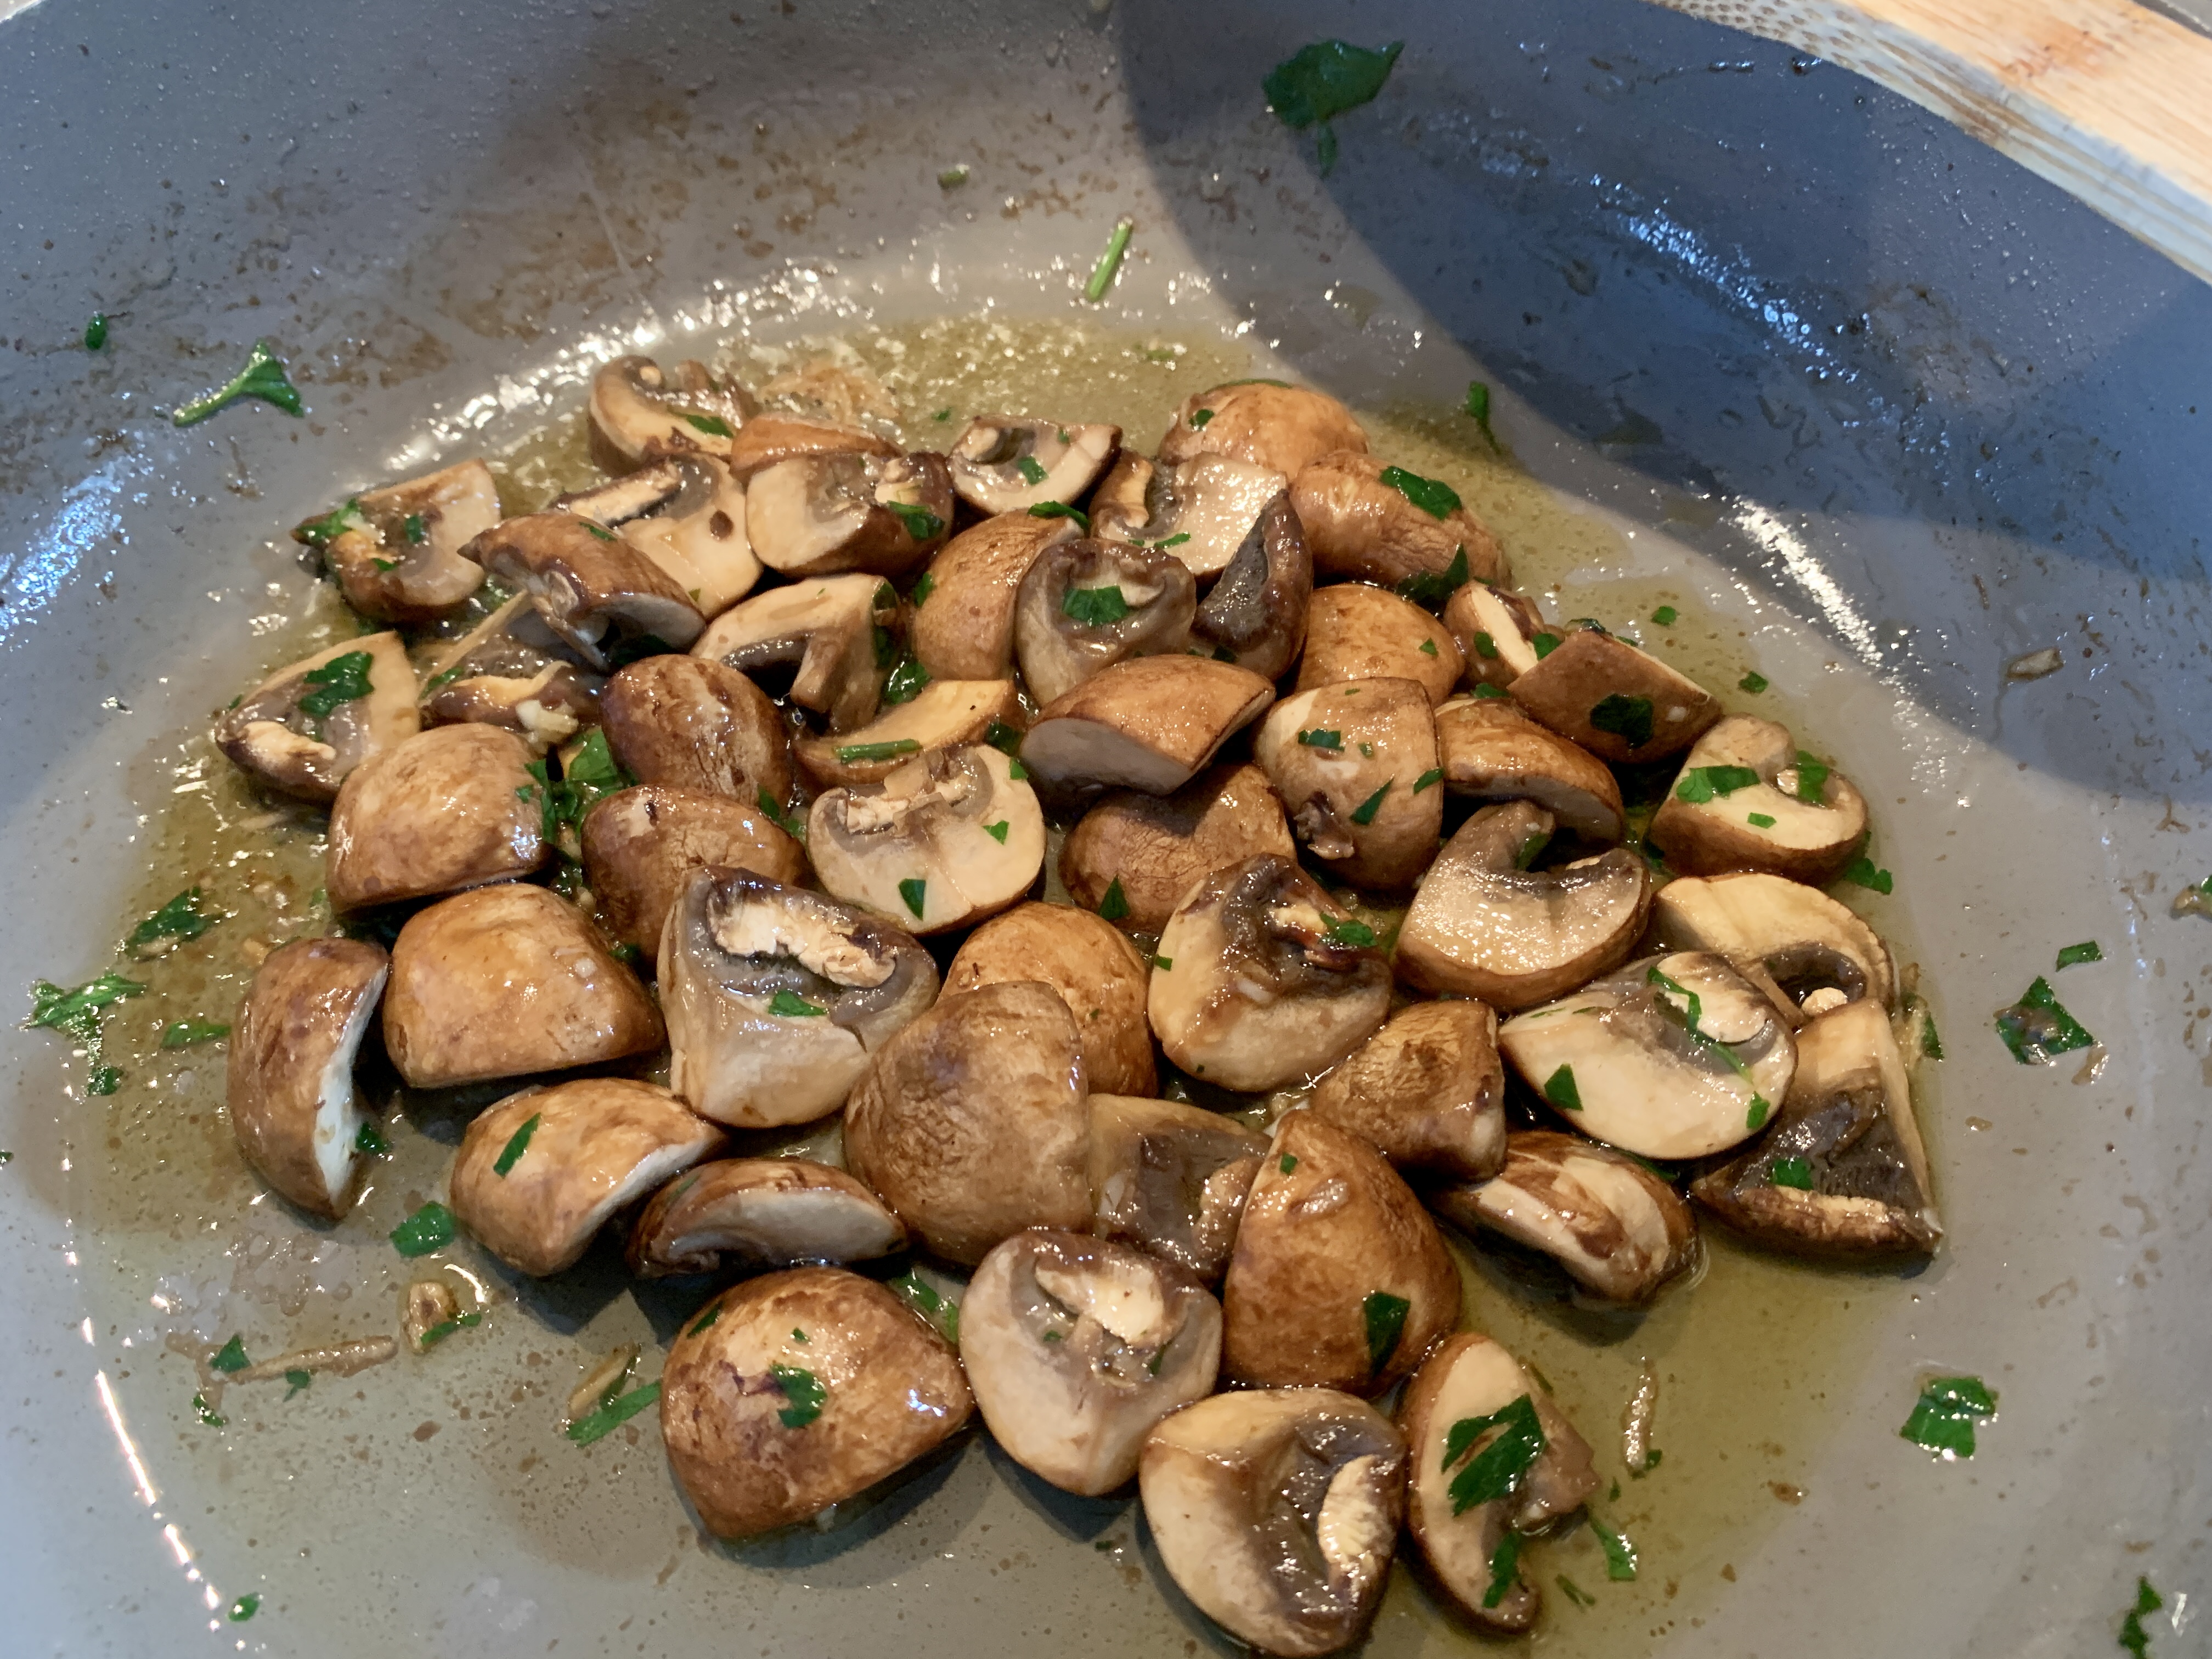 Best Sautéed Mushrooms And Linguine: Recipes At My Table